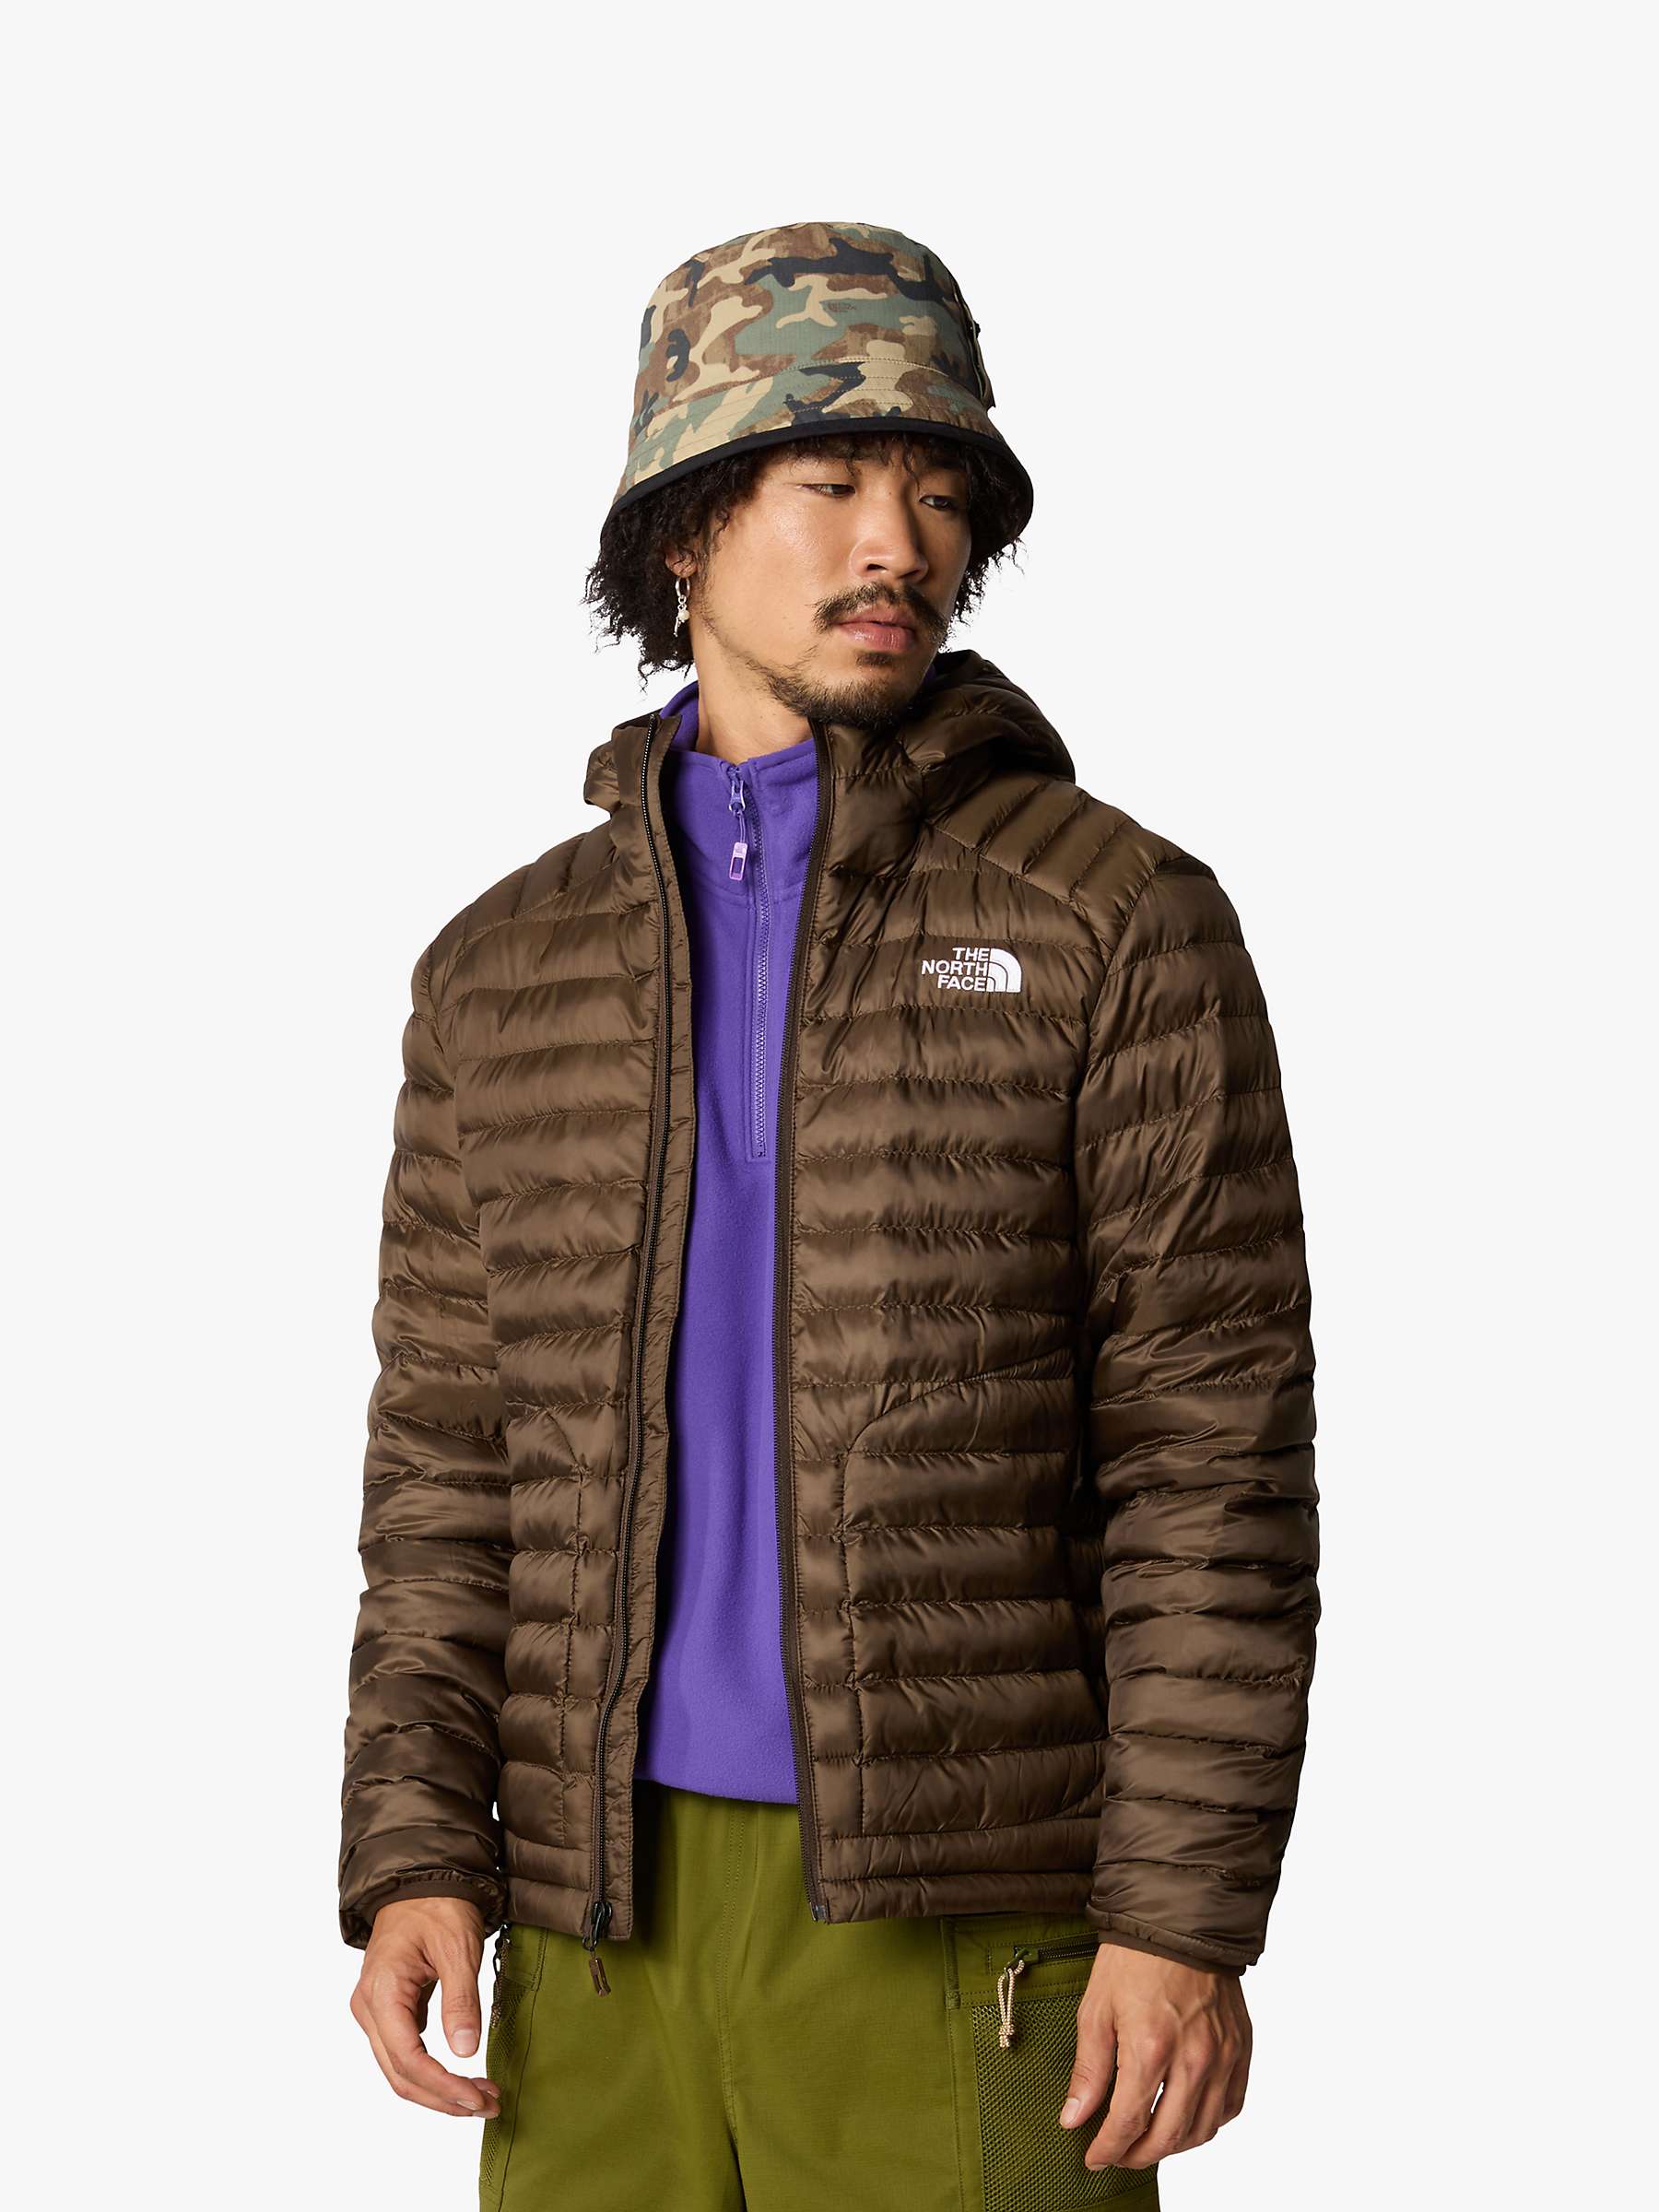 Buy The North Face Hula Hooded Jacket, Brown Online at johnlewis.com